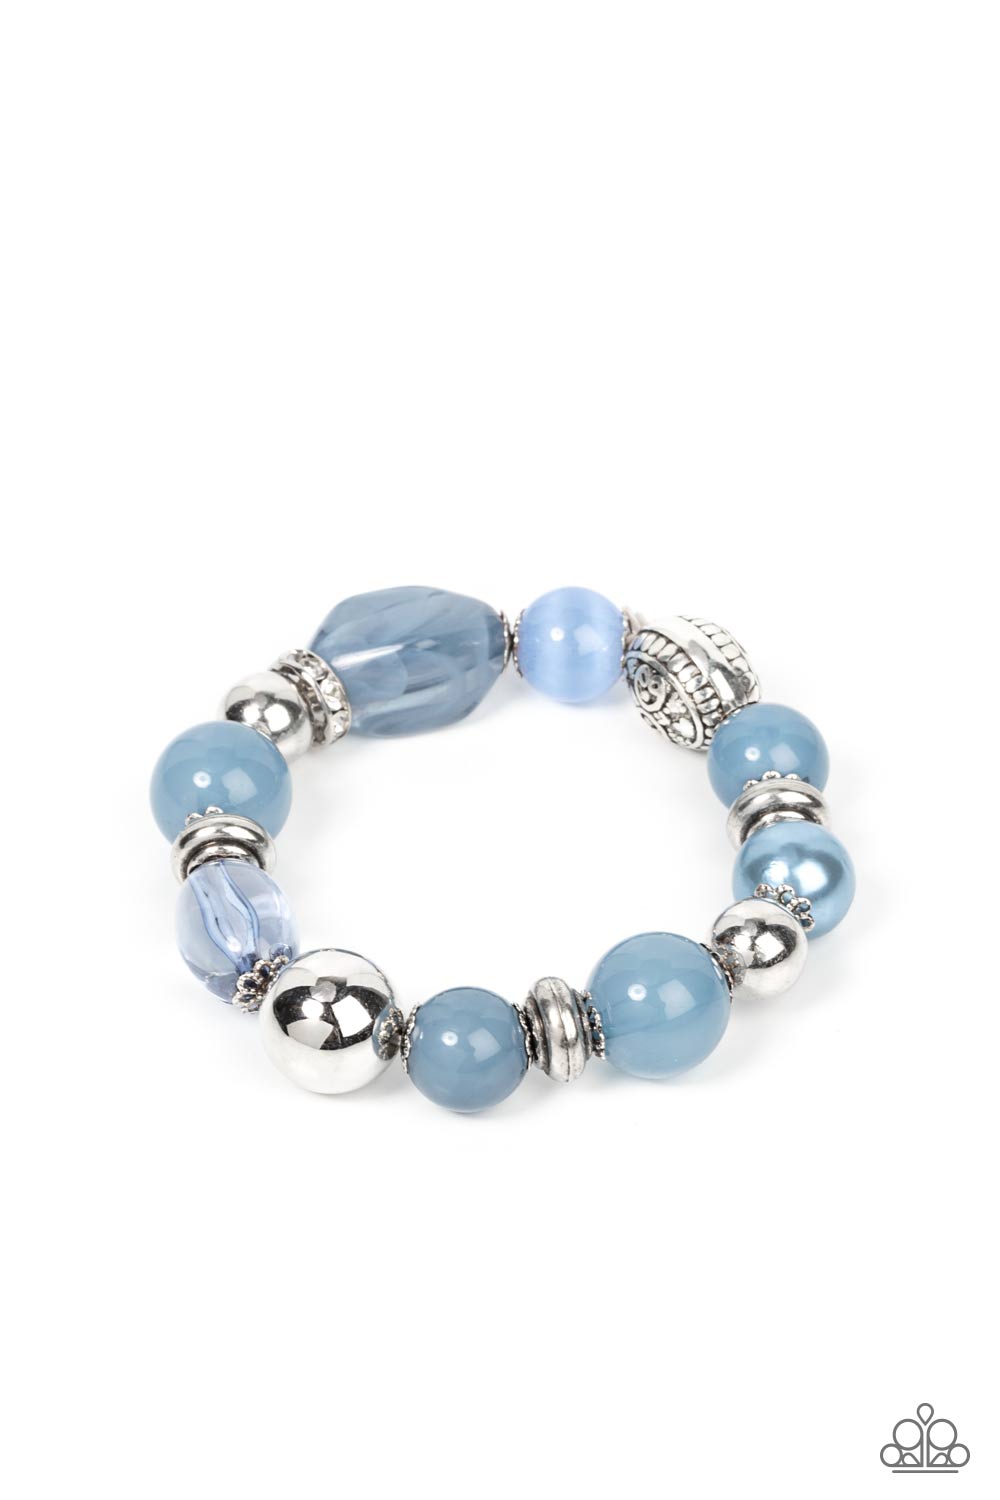 Tonal Takeover - Blue Opaque, Glassy, & Pearly Beaded Paparazzi Stretch Bracelet